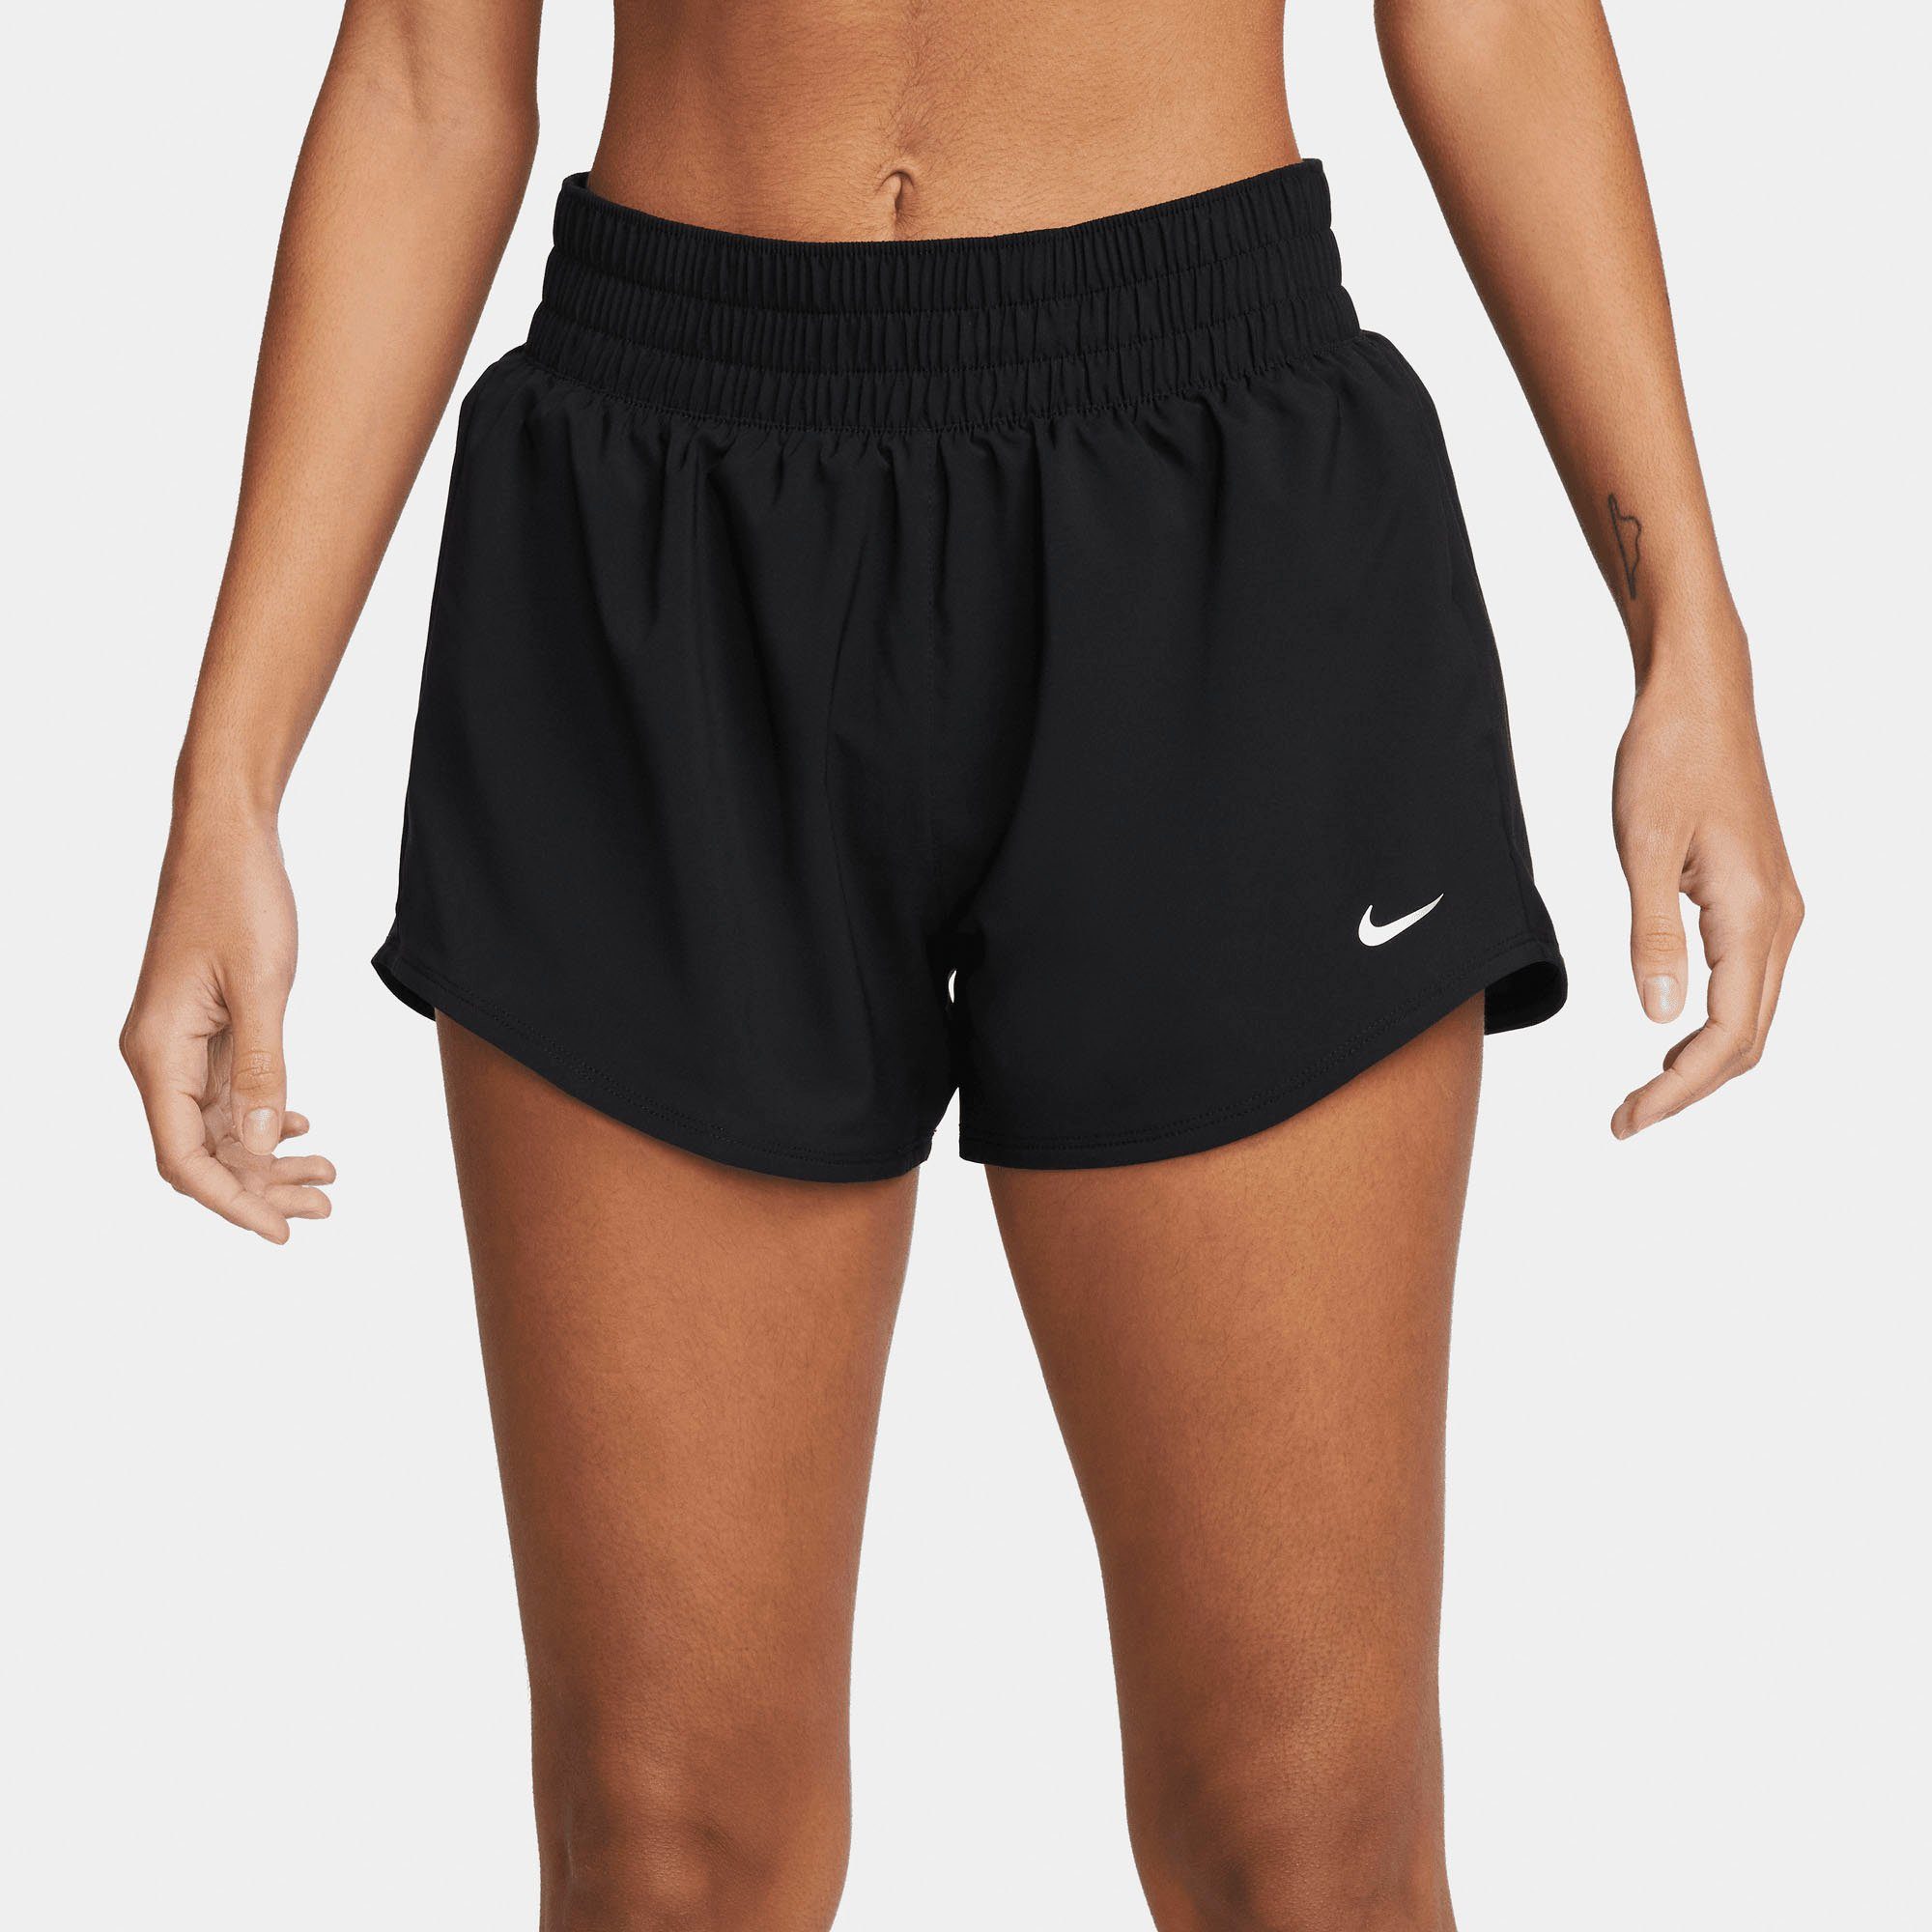 SILV BRIEF-LINED DRI-FIT ONE Nike WOMEN'S SHORTS MID-RISE Trainingsshorts BLACK/REFLECTIVE